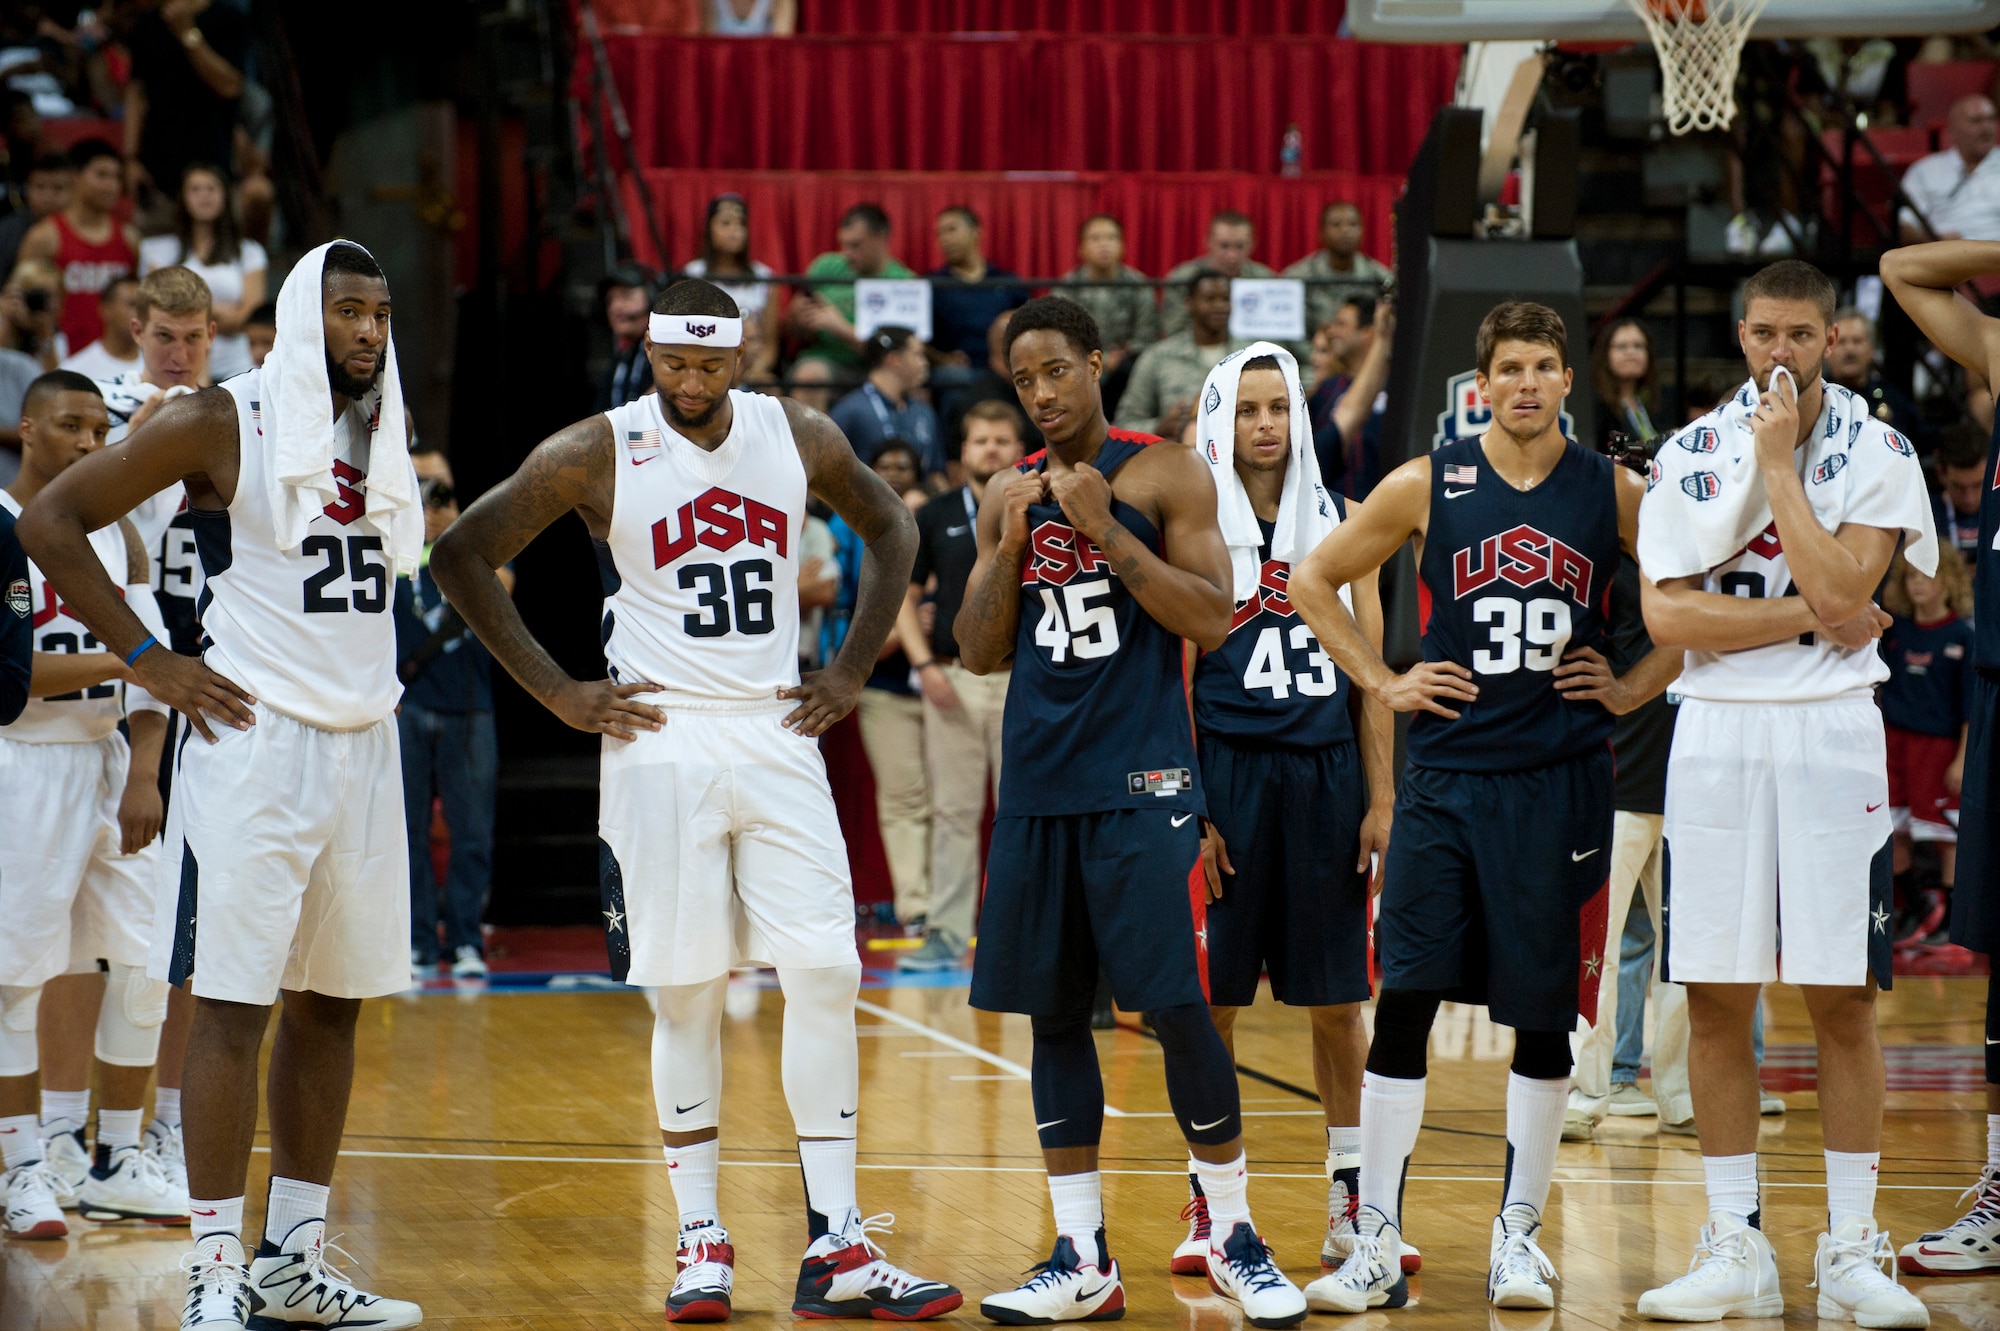 Players on the USA Basketball Men’s National Team react after their teammate Paul George suffered a serious leg injury during the fourth quarter of an intra-squad scrimmage at the Thomas and Mack Center in Las Vegas, August 1, 2014. After George was carted off the court, head coach Mike Krzyzewski addressed the arena stating the game would not continue out of respect to George and his family. (U.S. Air Force photo by Airman 1st Class Thomas Spangler)